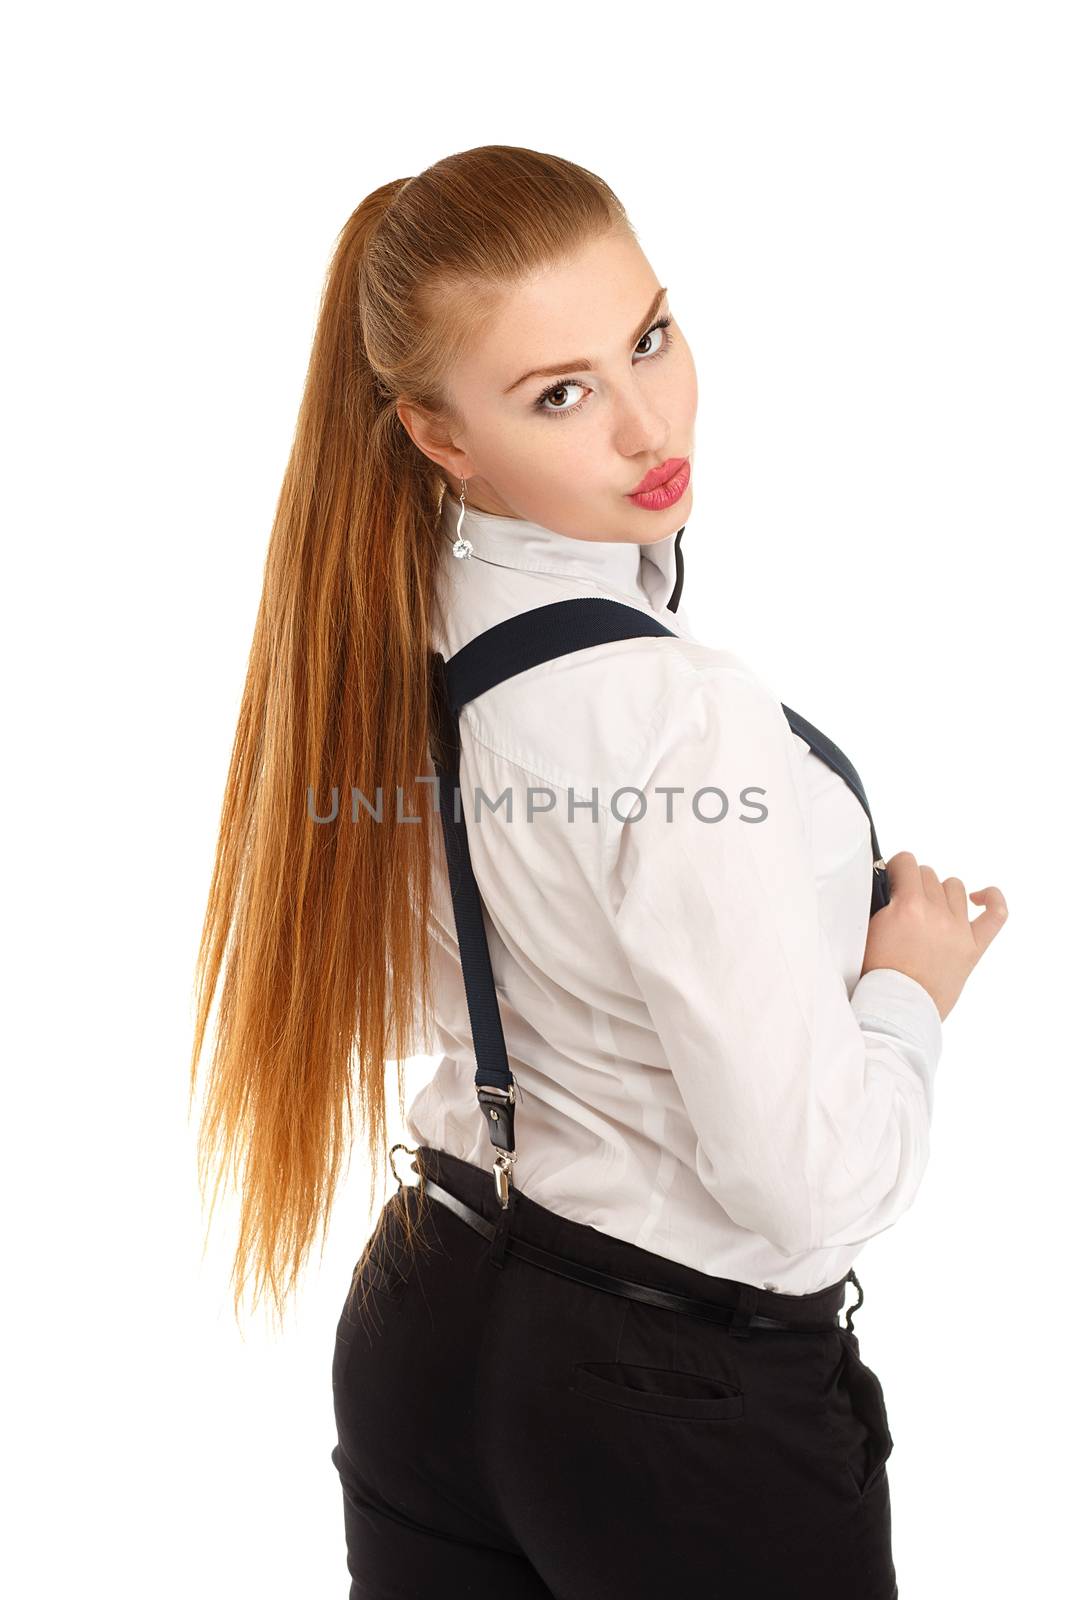 Portrait of beautiful young woman in strict clothing with bow tie isolated on white background